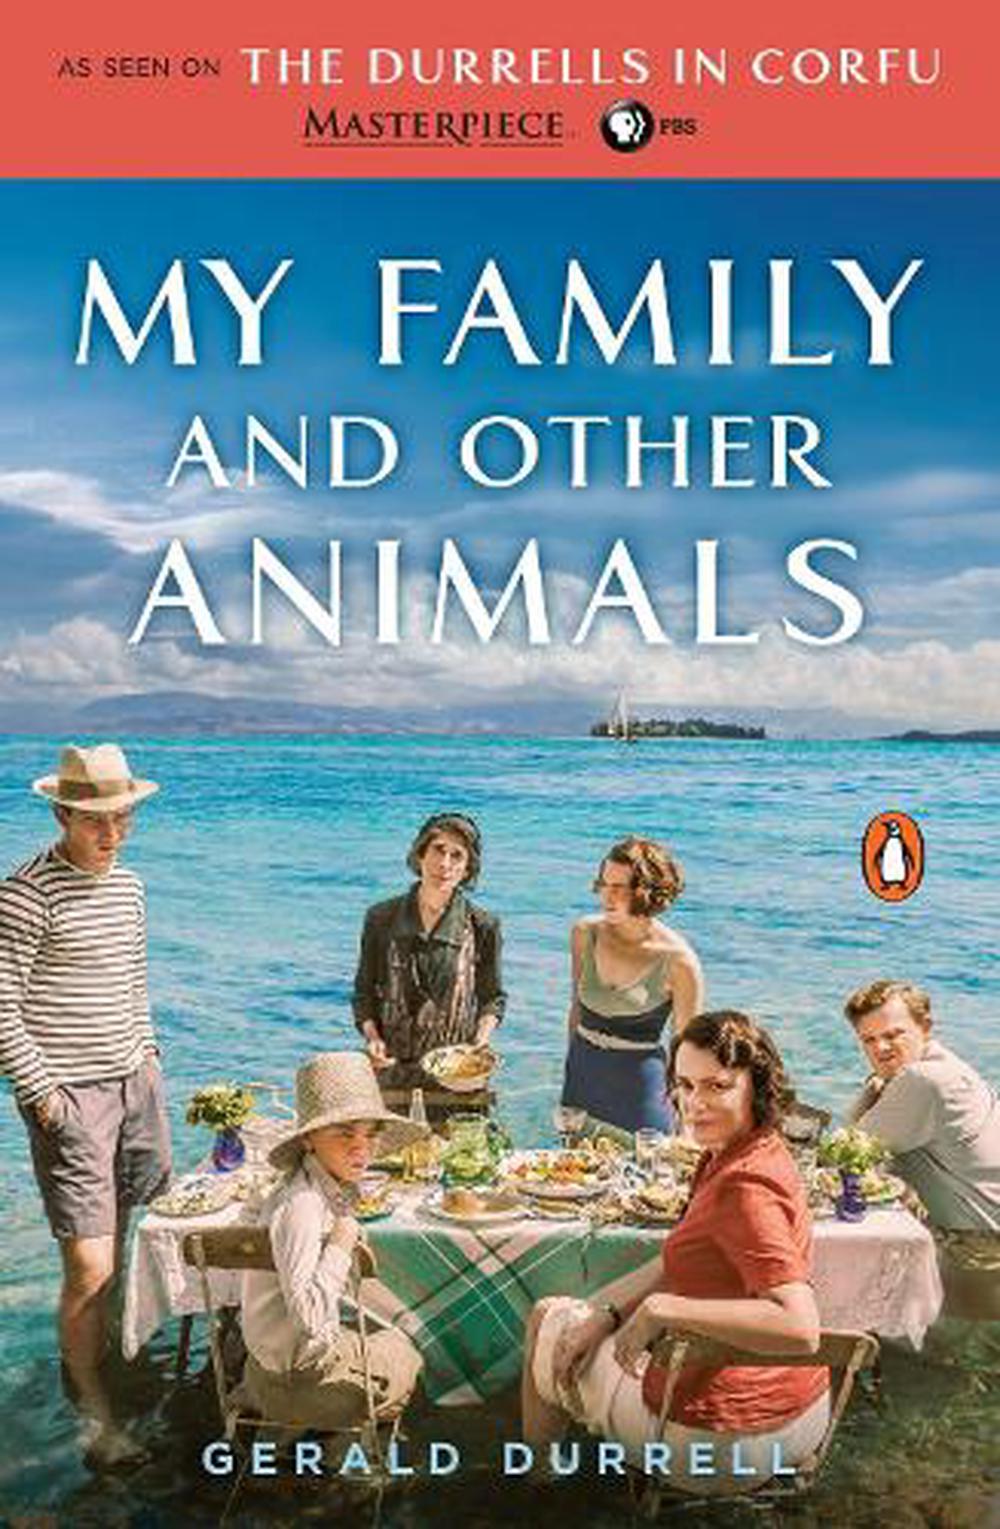 my family and other animals movie review